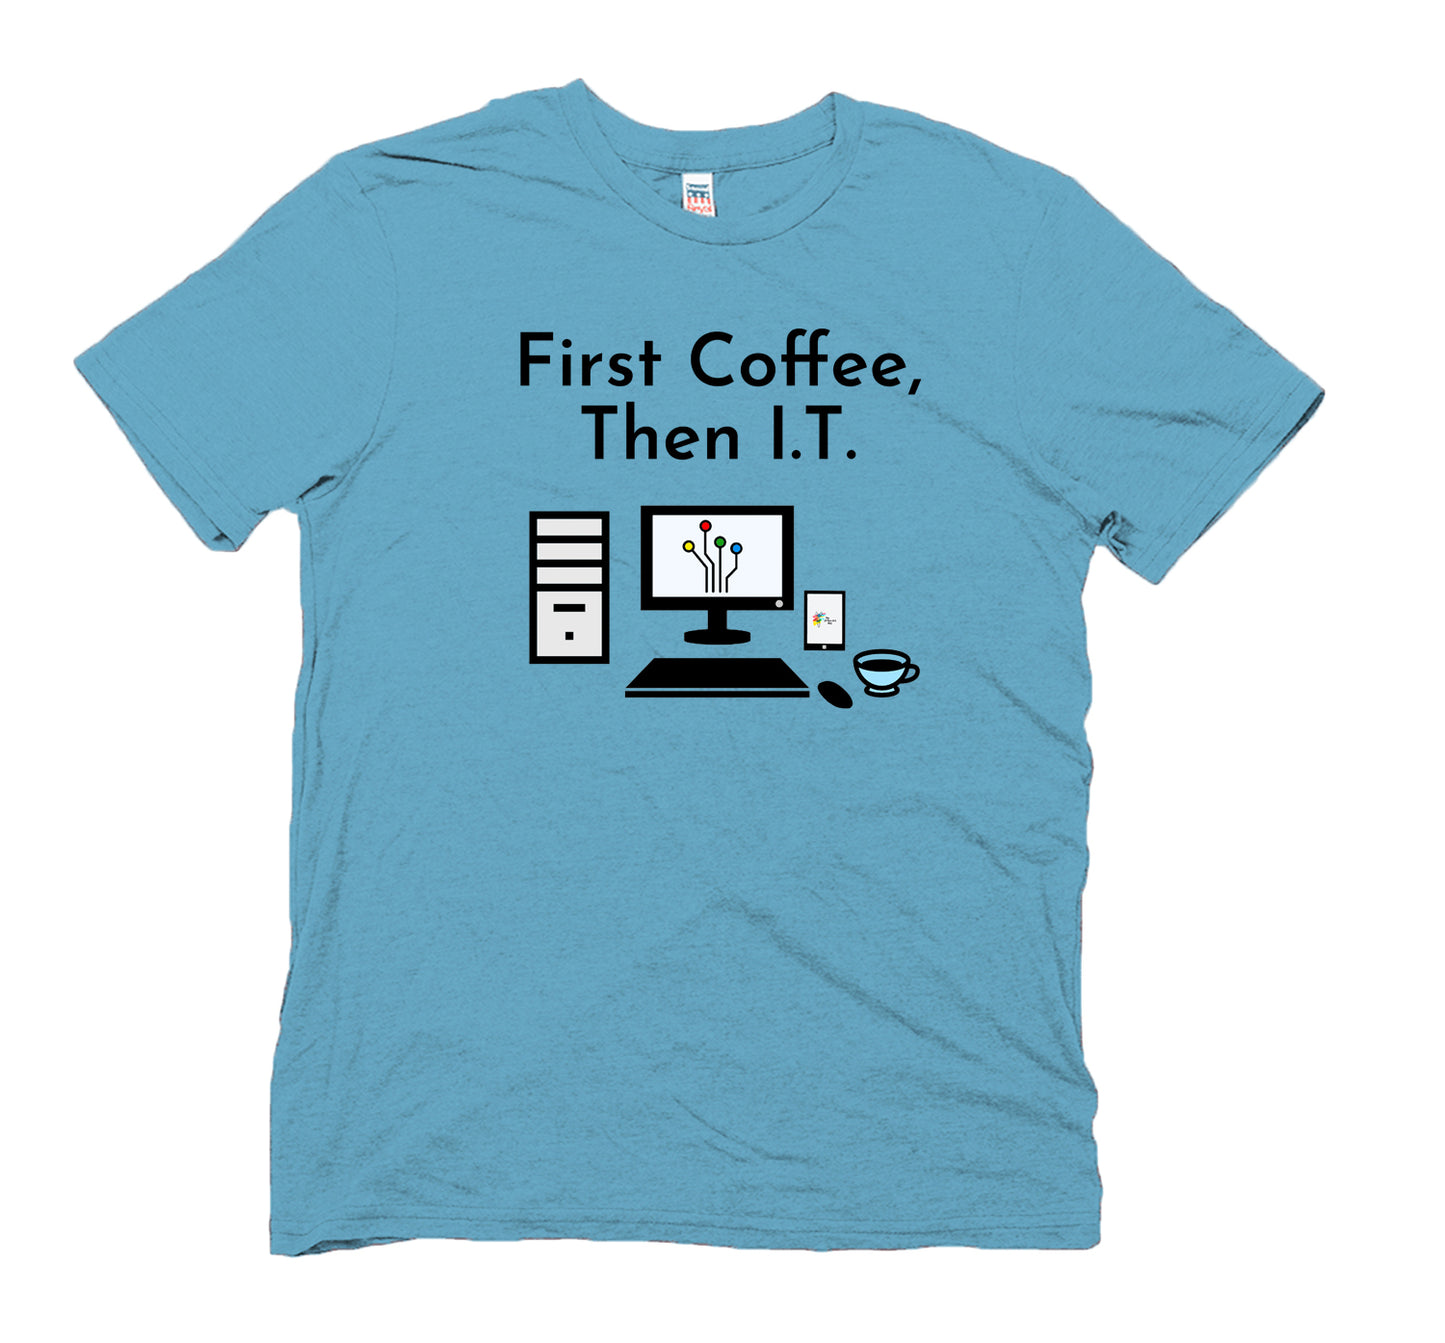 Information Technology T Shirt First Coffee Then I.T. by The Office Art Guy, scuba blue color